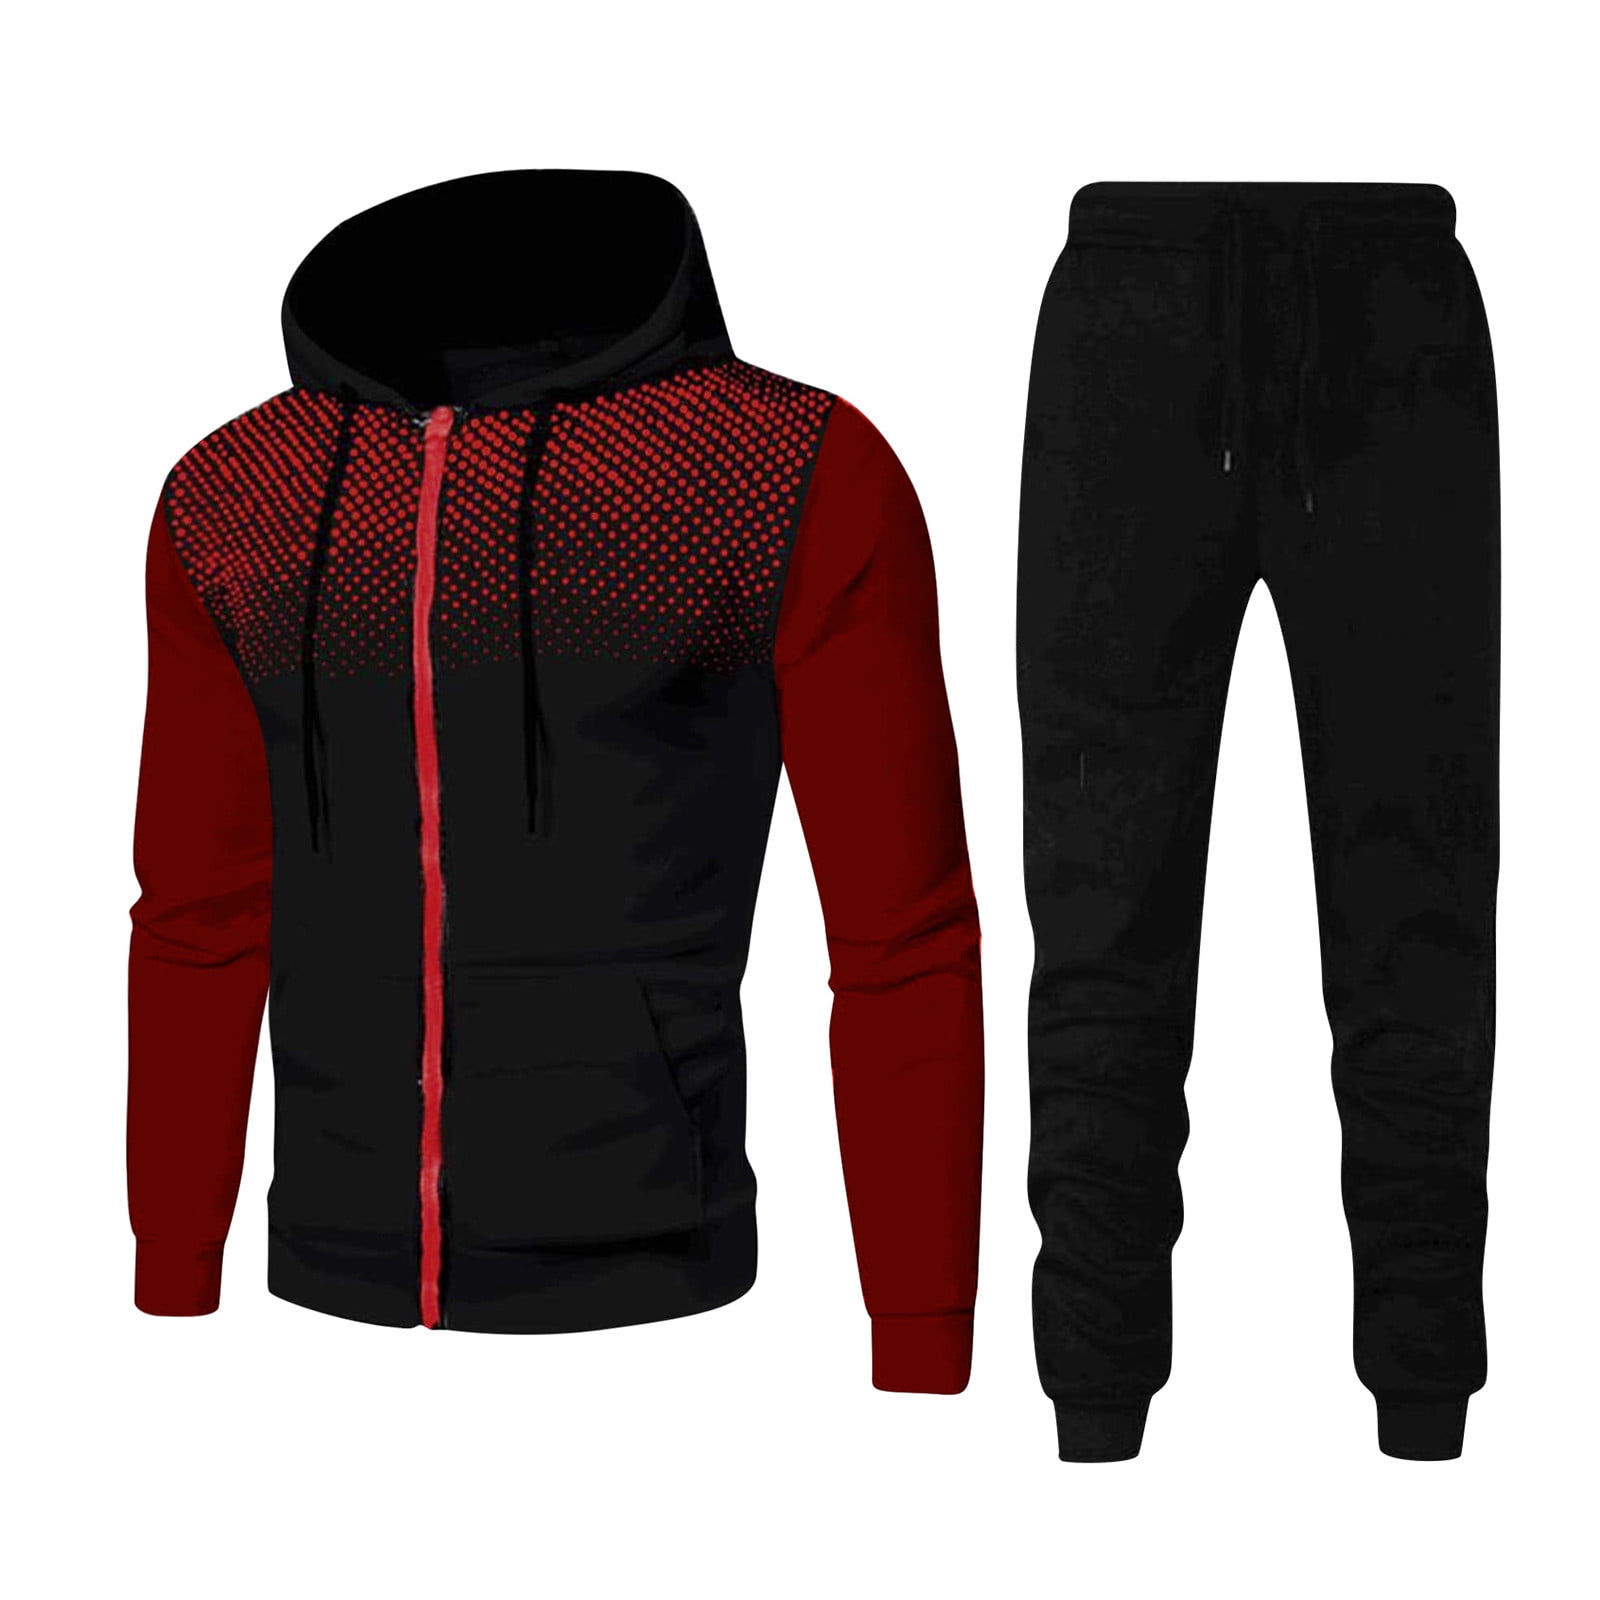 AOOCHASLIY Mens Sweat Suits Sets Clearance Jogging Suits Winter Sports ...